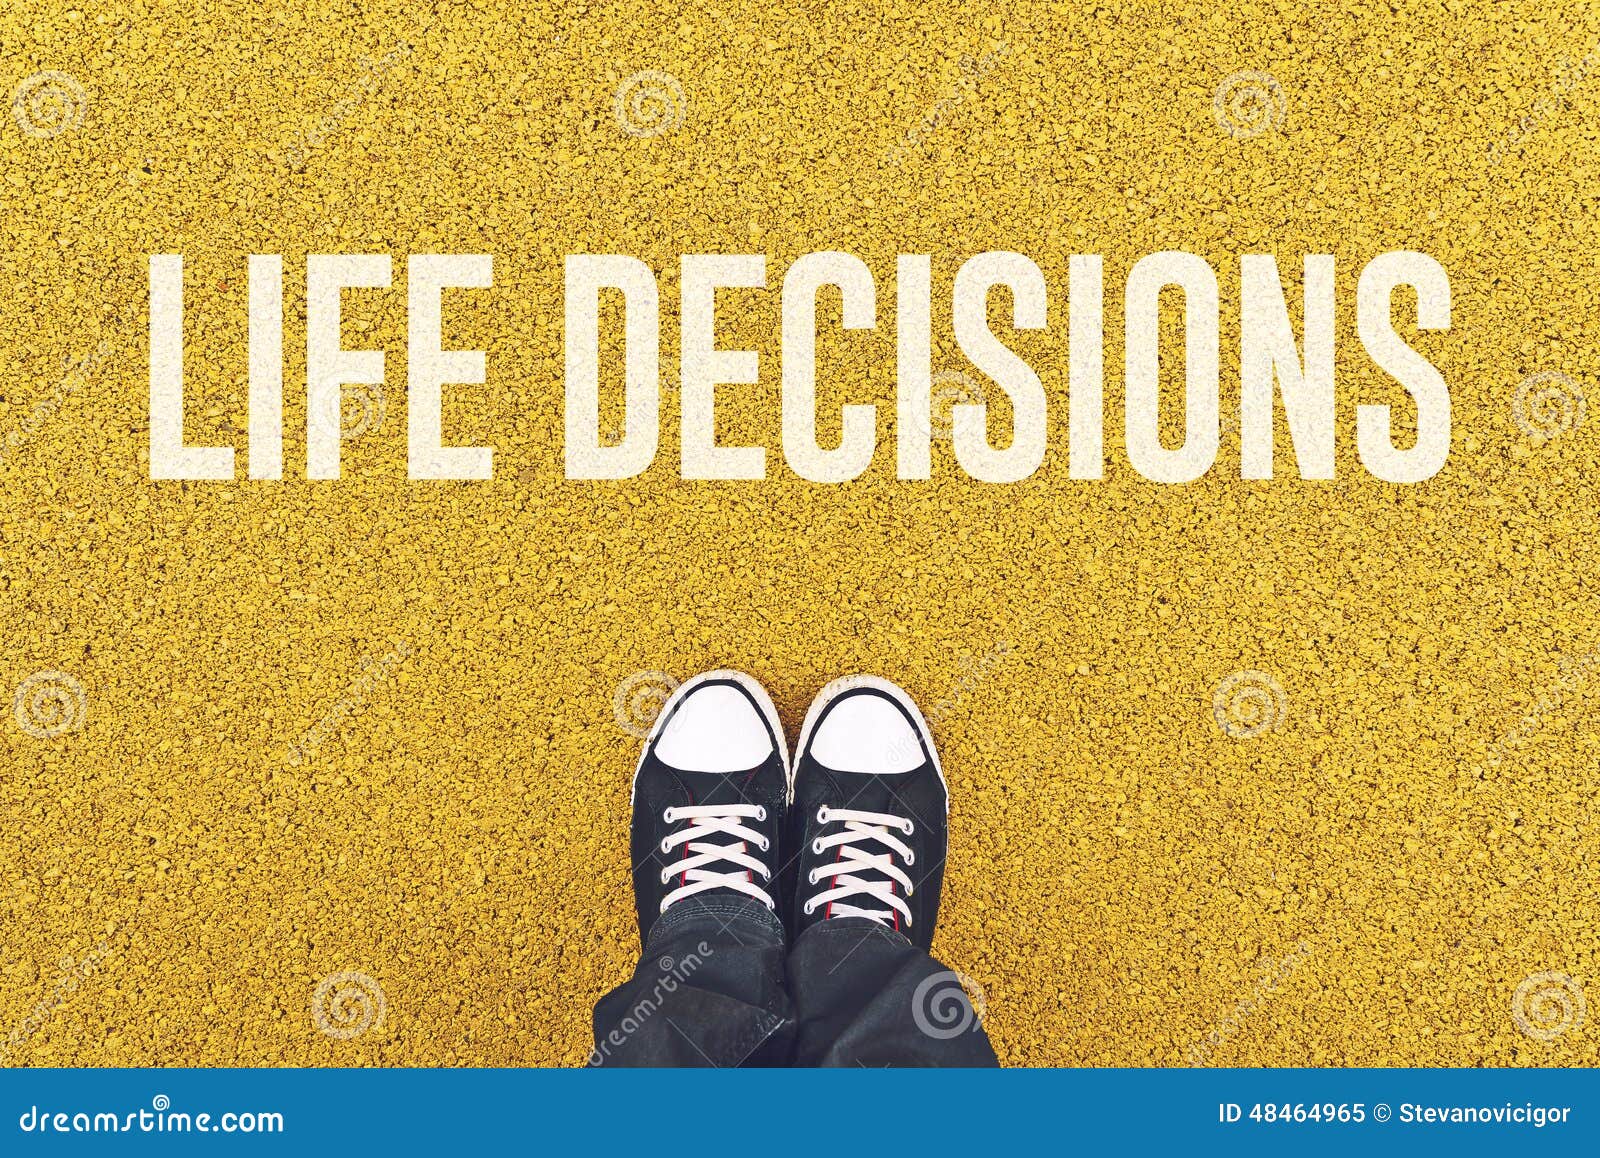 young man standing at life decisions sign